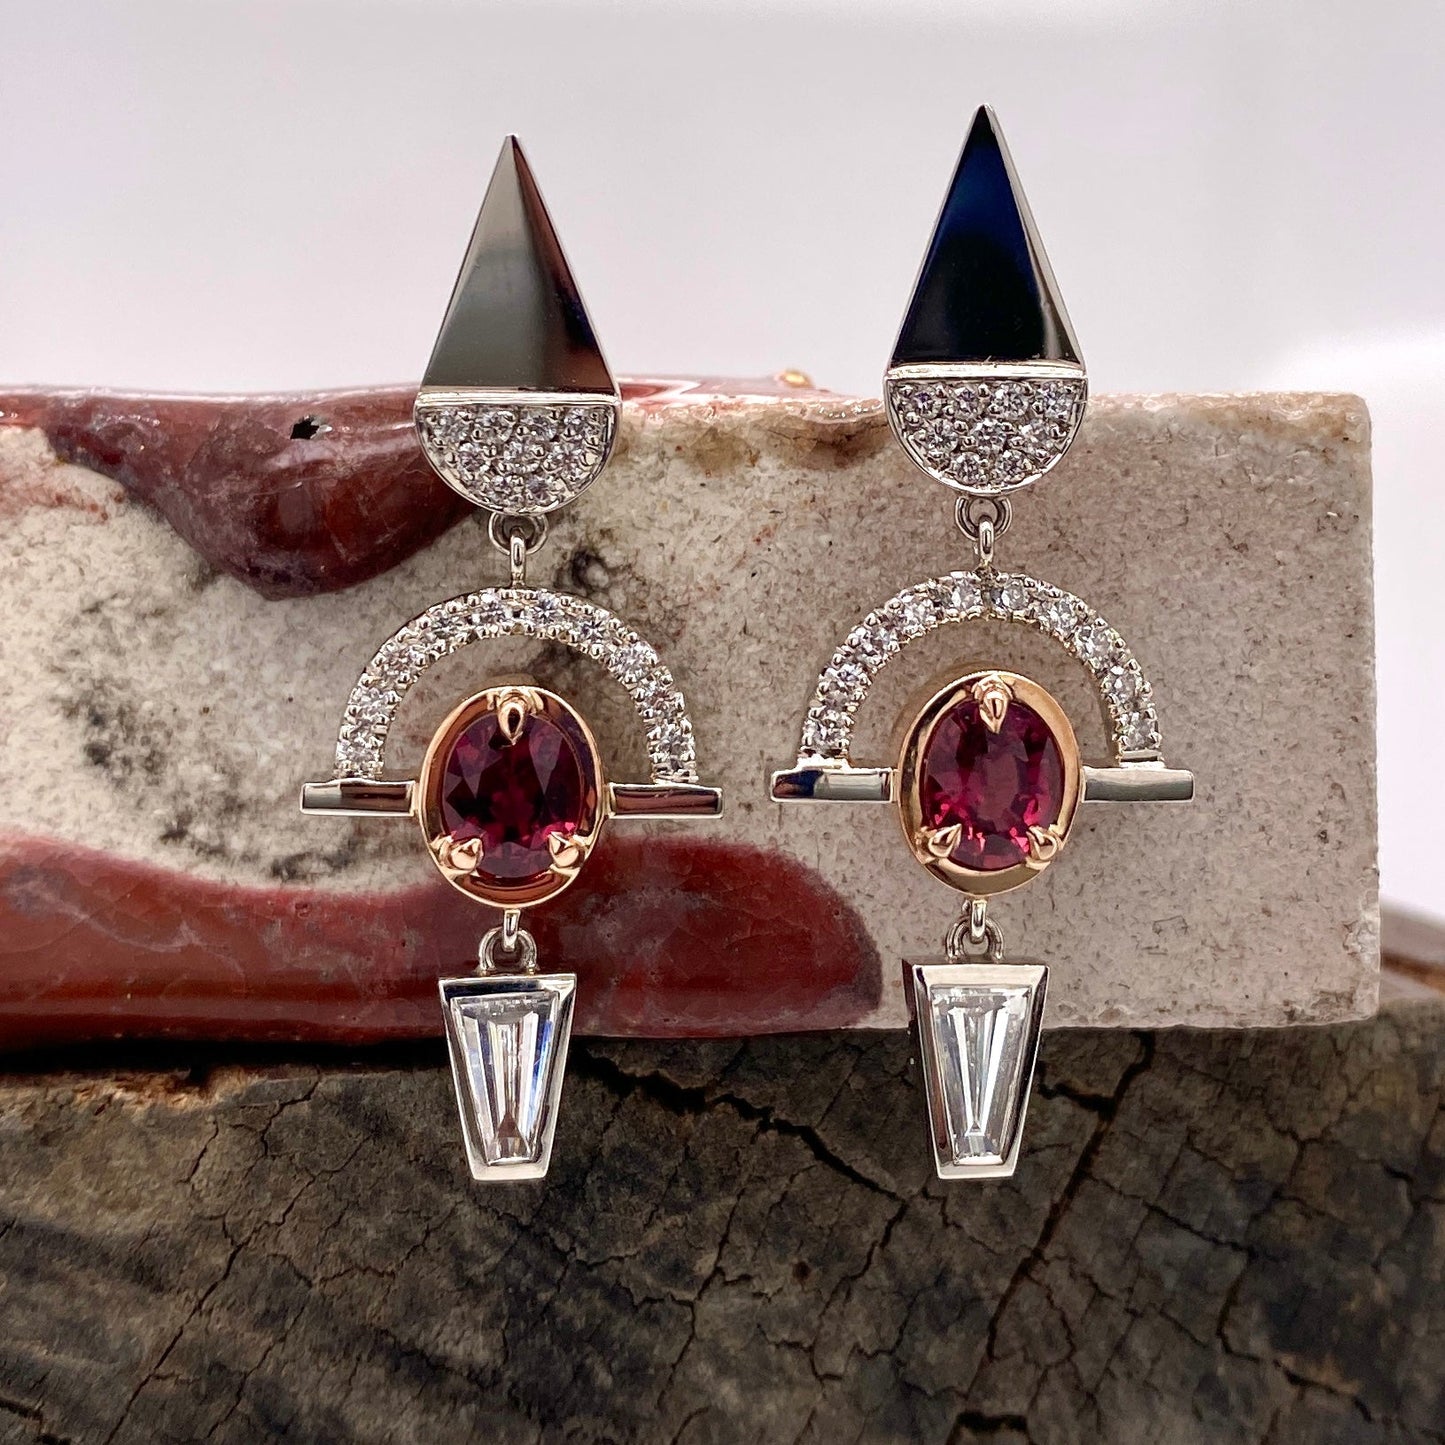 One of a Kind. Chrysler Earrings with Ruby and Diamonds